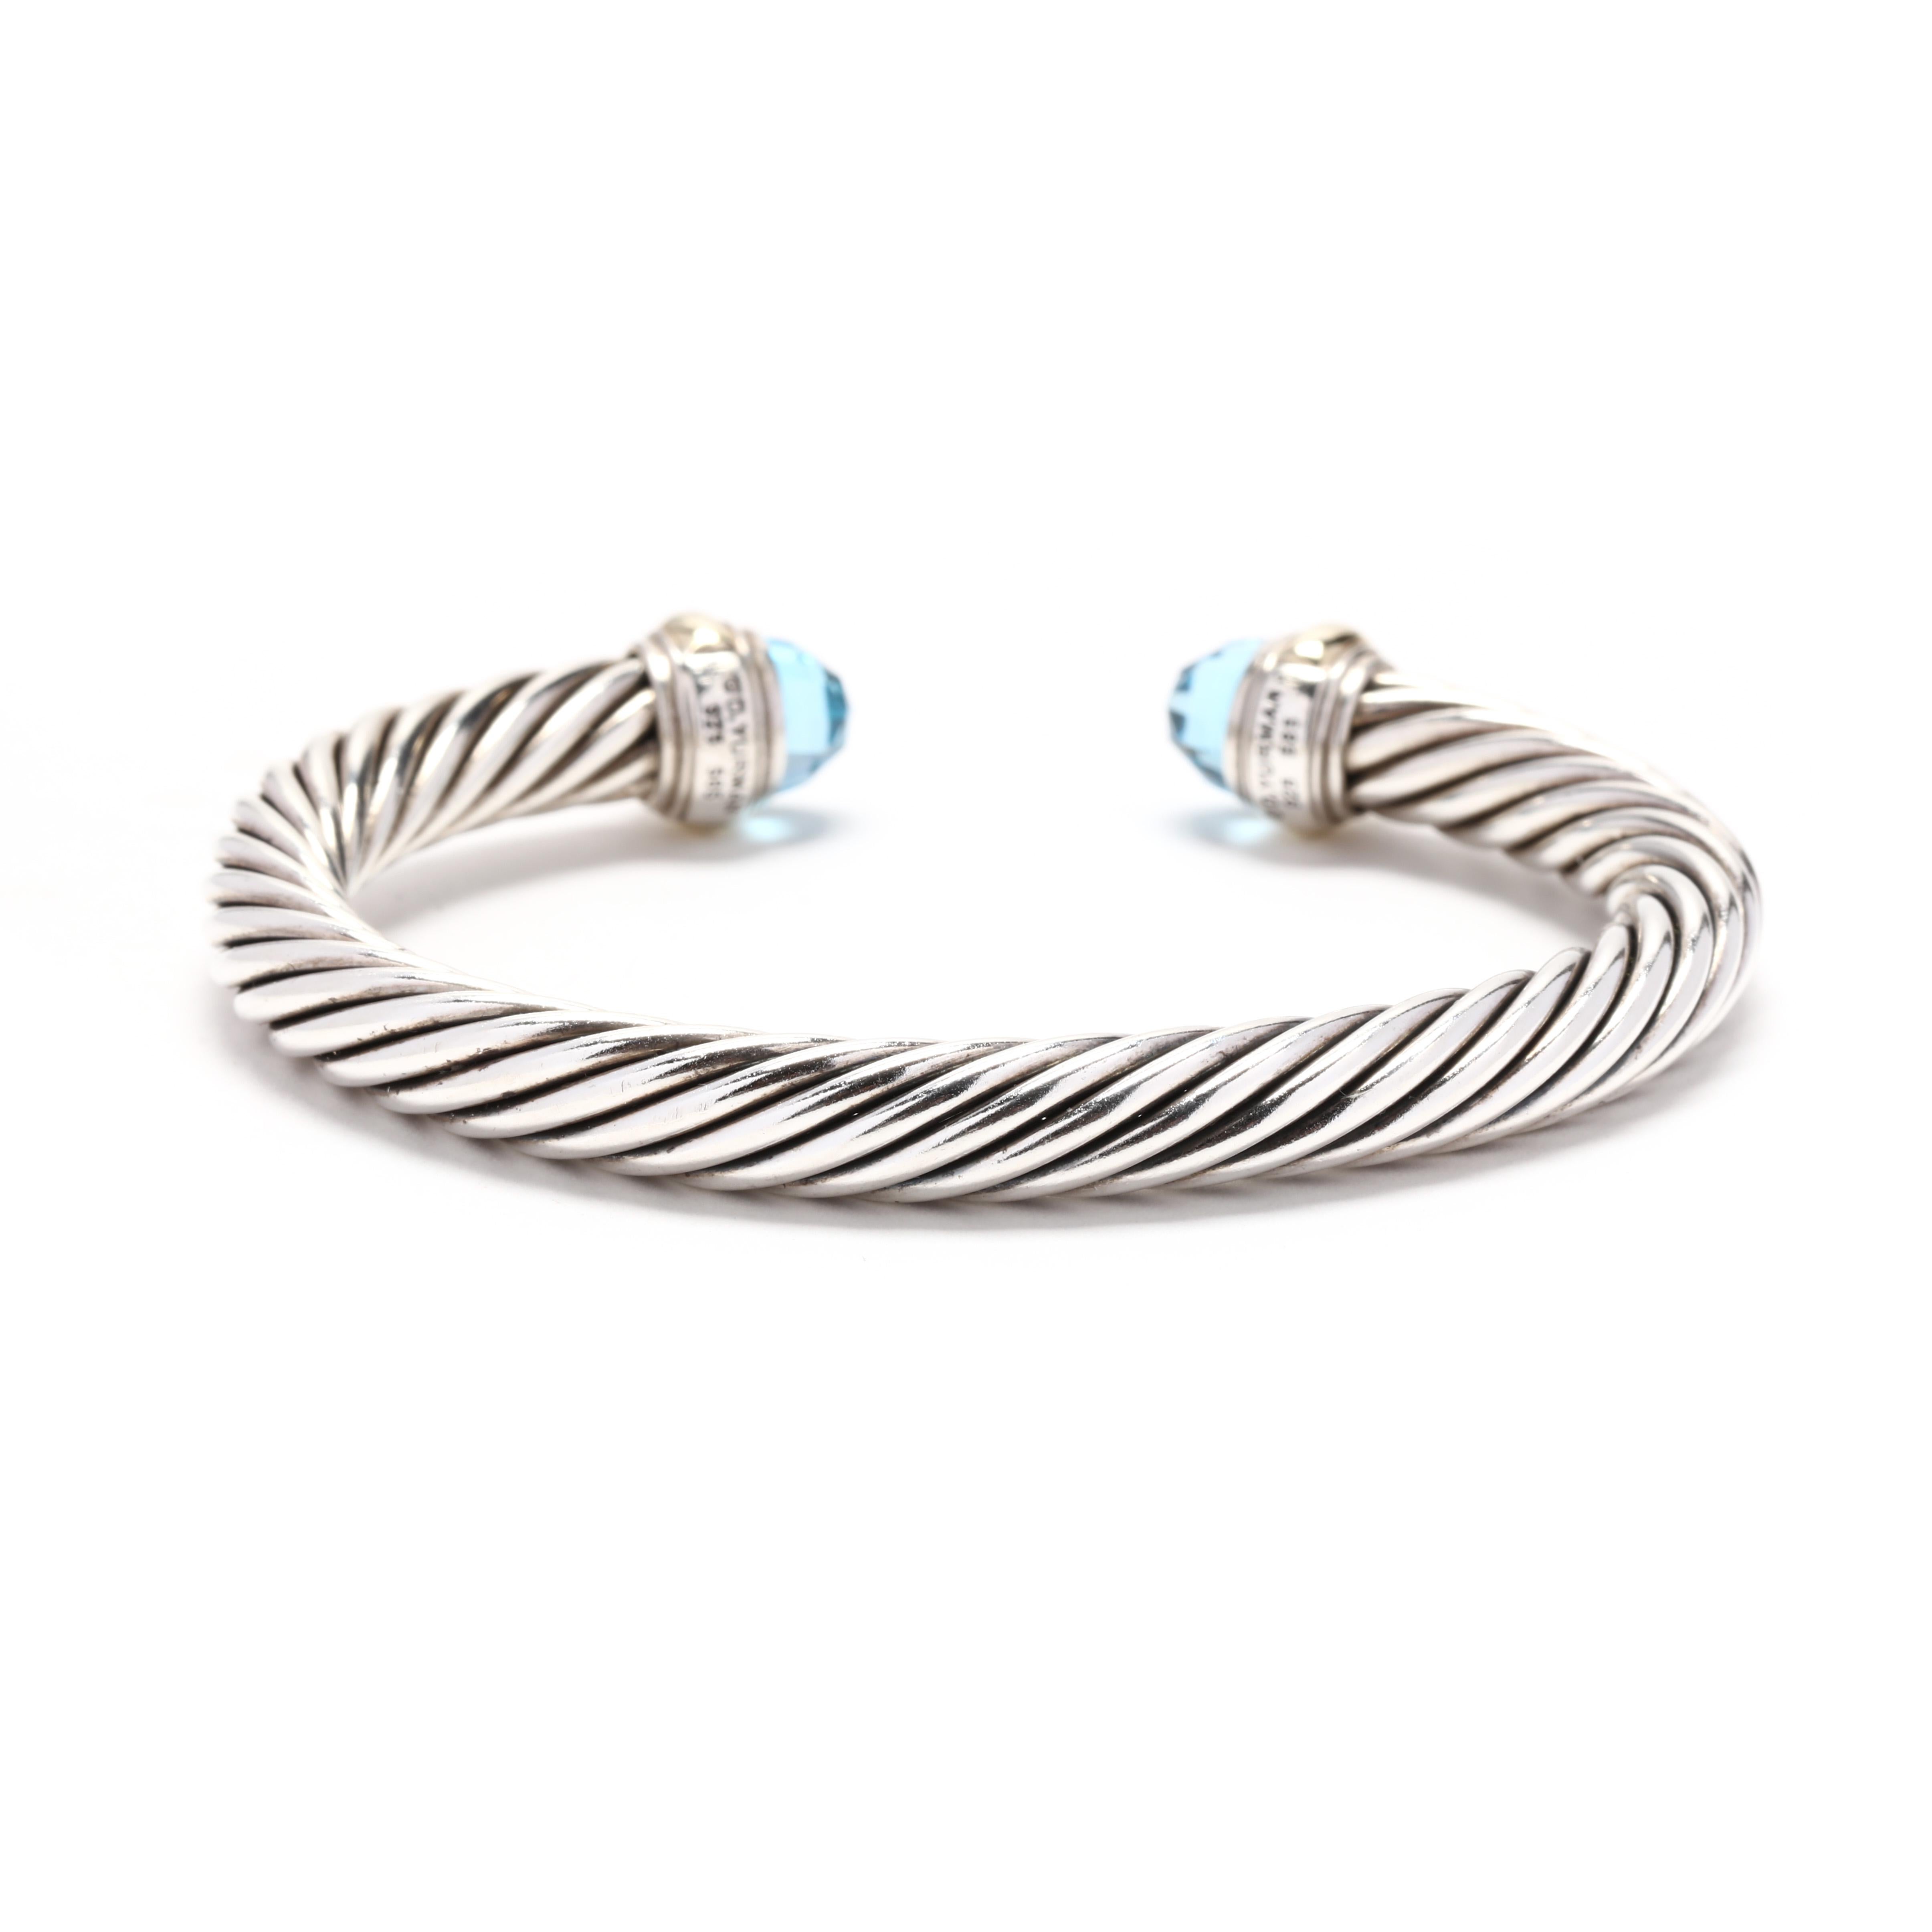 A 14 karat yellow gold and sterling silver blue topaz cuff bracelet by David Yurman. This bracelet features a silver cable cuff design with faceted blue topaz end caps and yellow gold detailing.



Length: 6.25 in.; adjustable



Width: 7